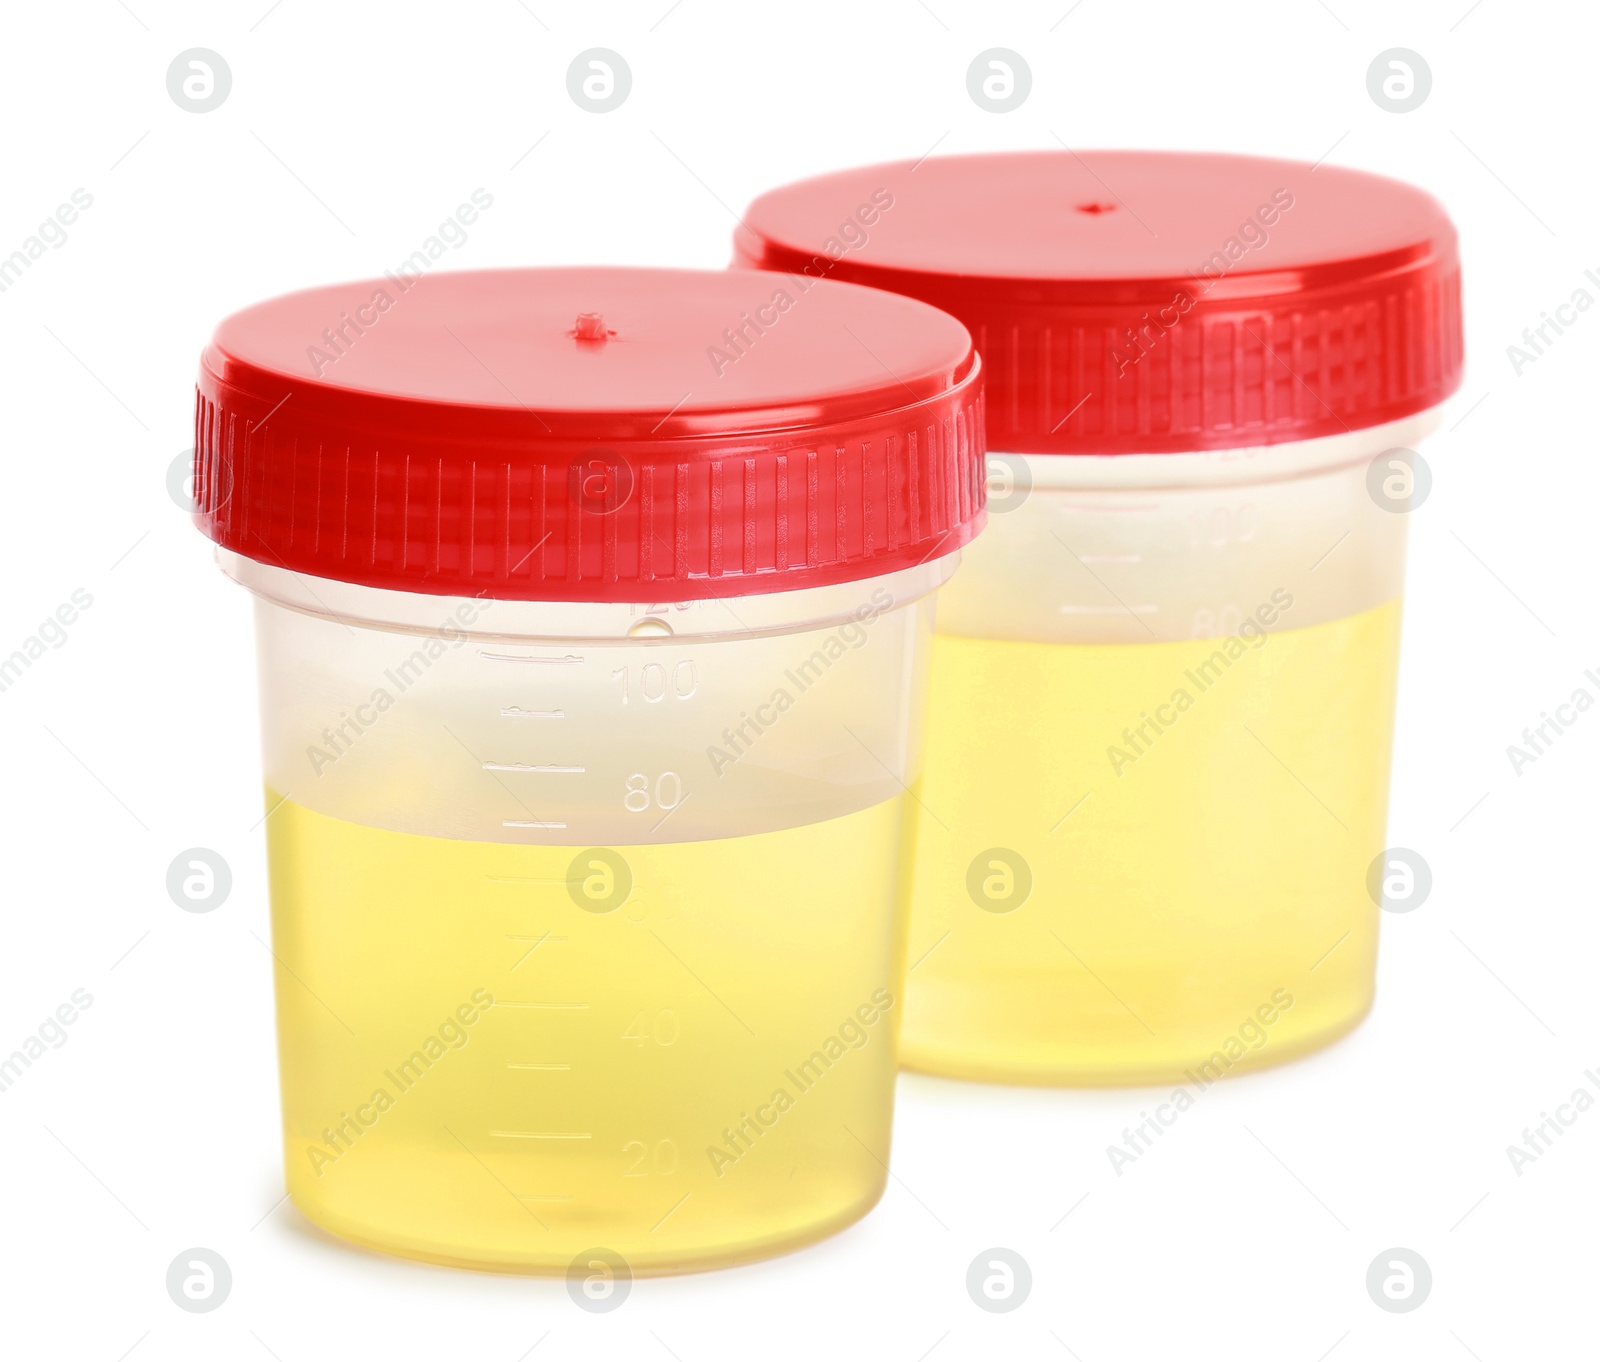 Photo of Containers with urine samples for analysis on white background